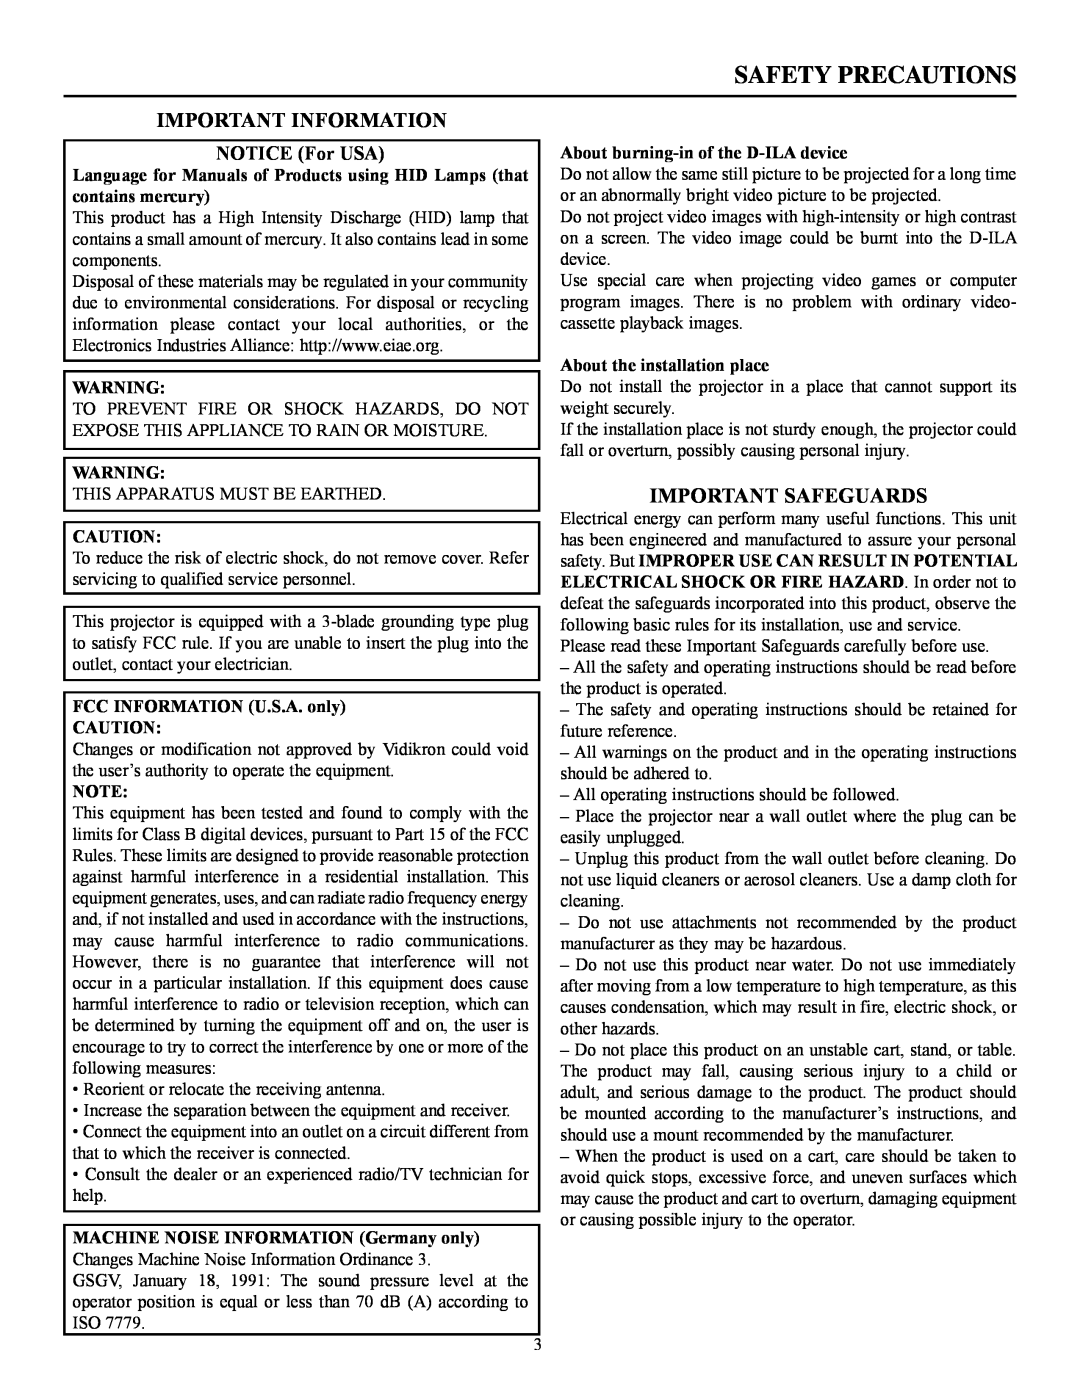 Vidikron 60 manual Safety Precautions, Important Information, Important Safeguards, NOTICE For USA 